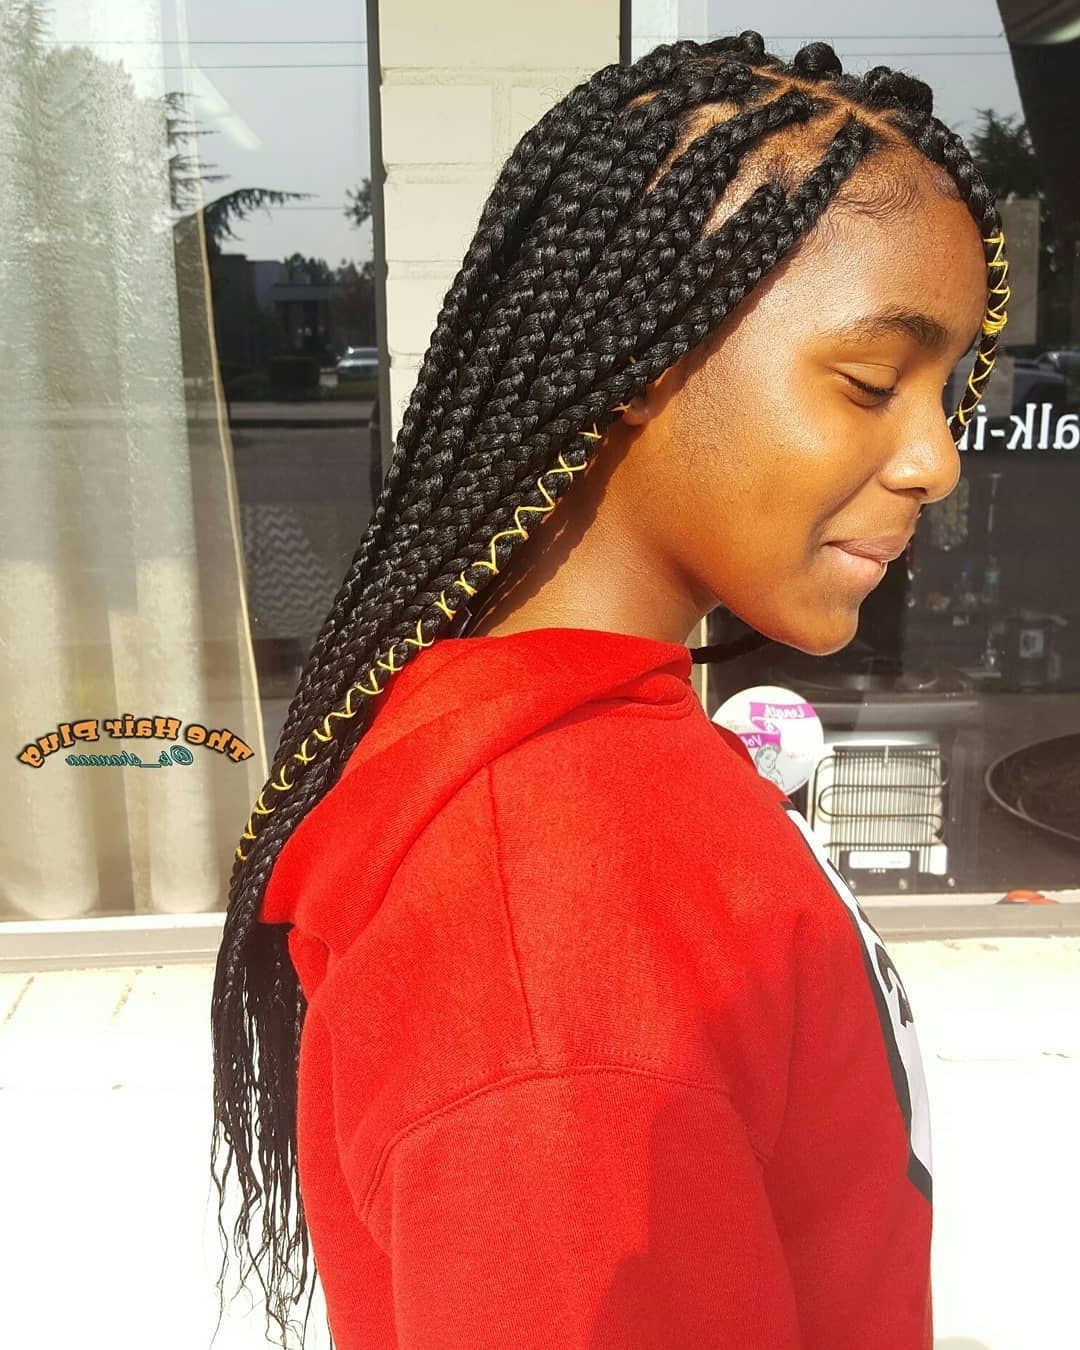 Renobraider Instagram Tag – Instahu Within Widely Used Geometric Tribal Fulani Pattern Braids With Curly Wisps (View 4 of 15)